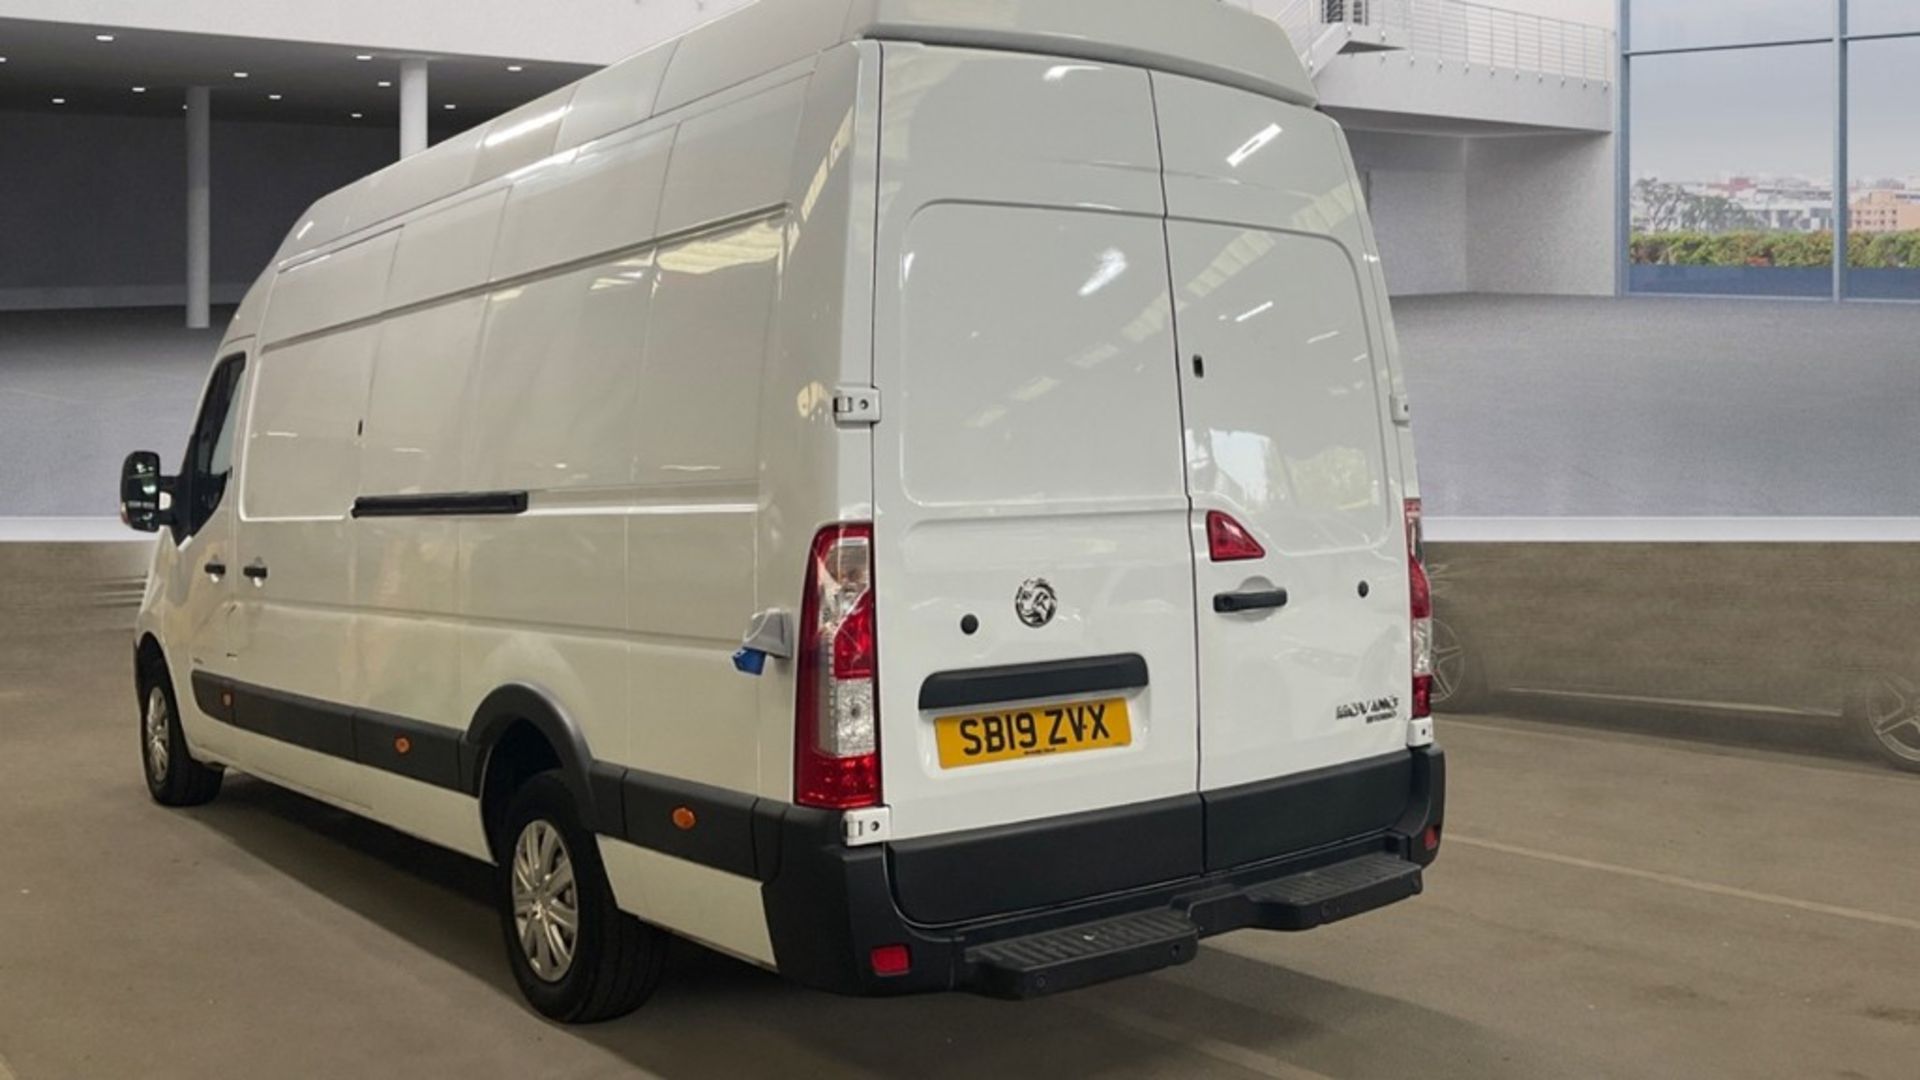 ** ON SALE ** Vauxhall Movano 3500 RWDS 2.3 CDTI 145 L4 H3 2019 '19 Reg' - Only 56,125 miles - A/C - Image 3 of 8